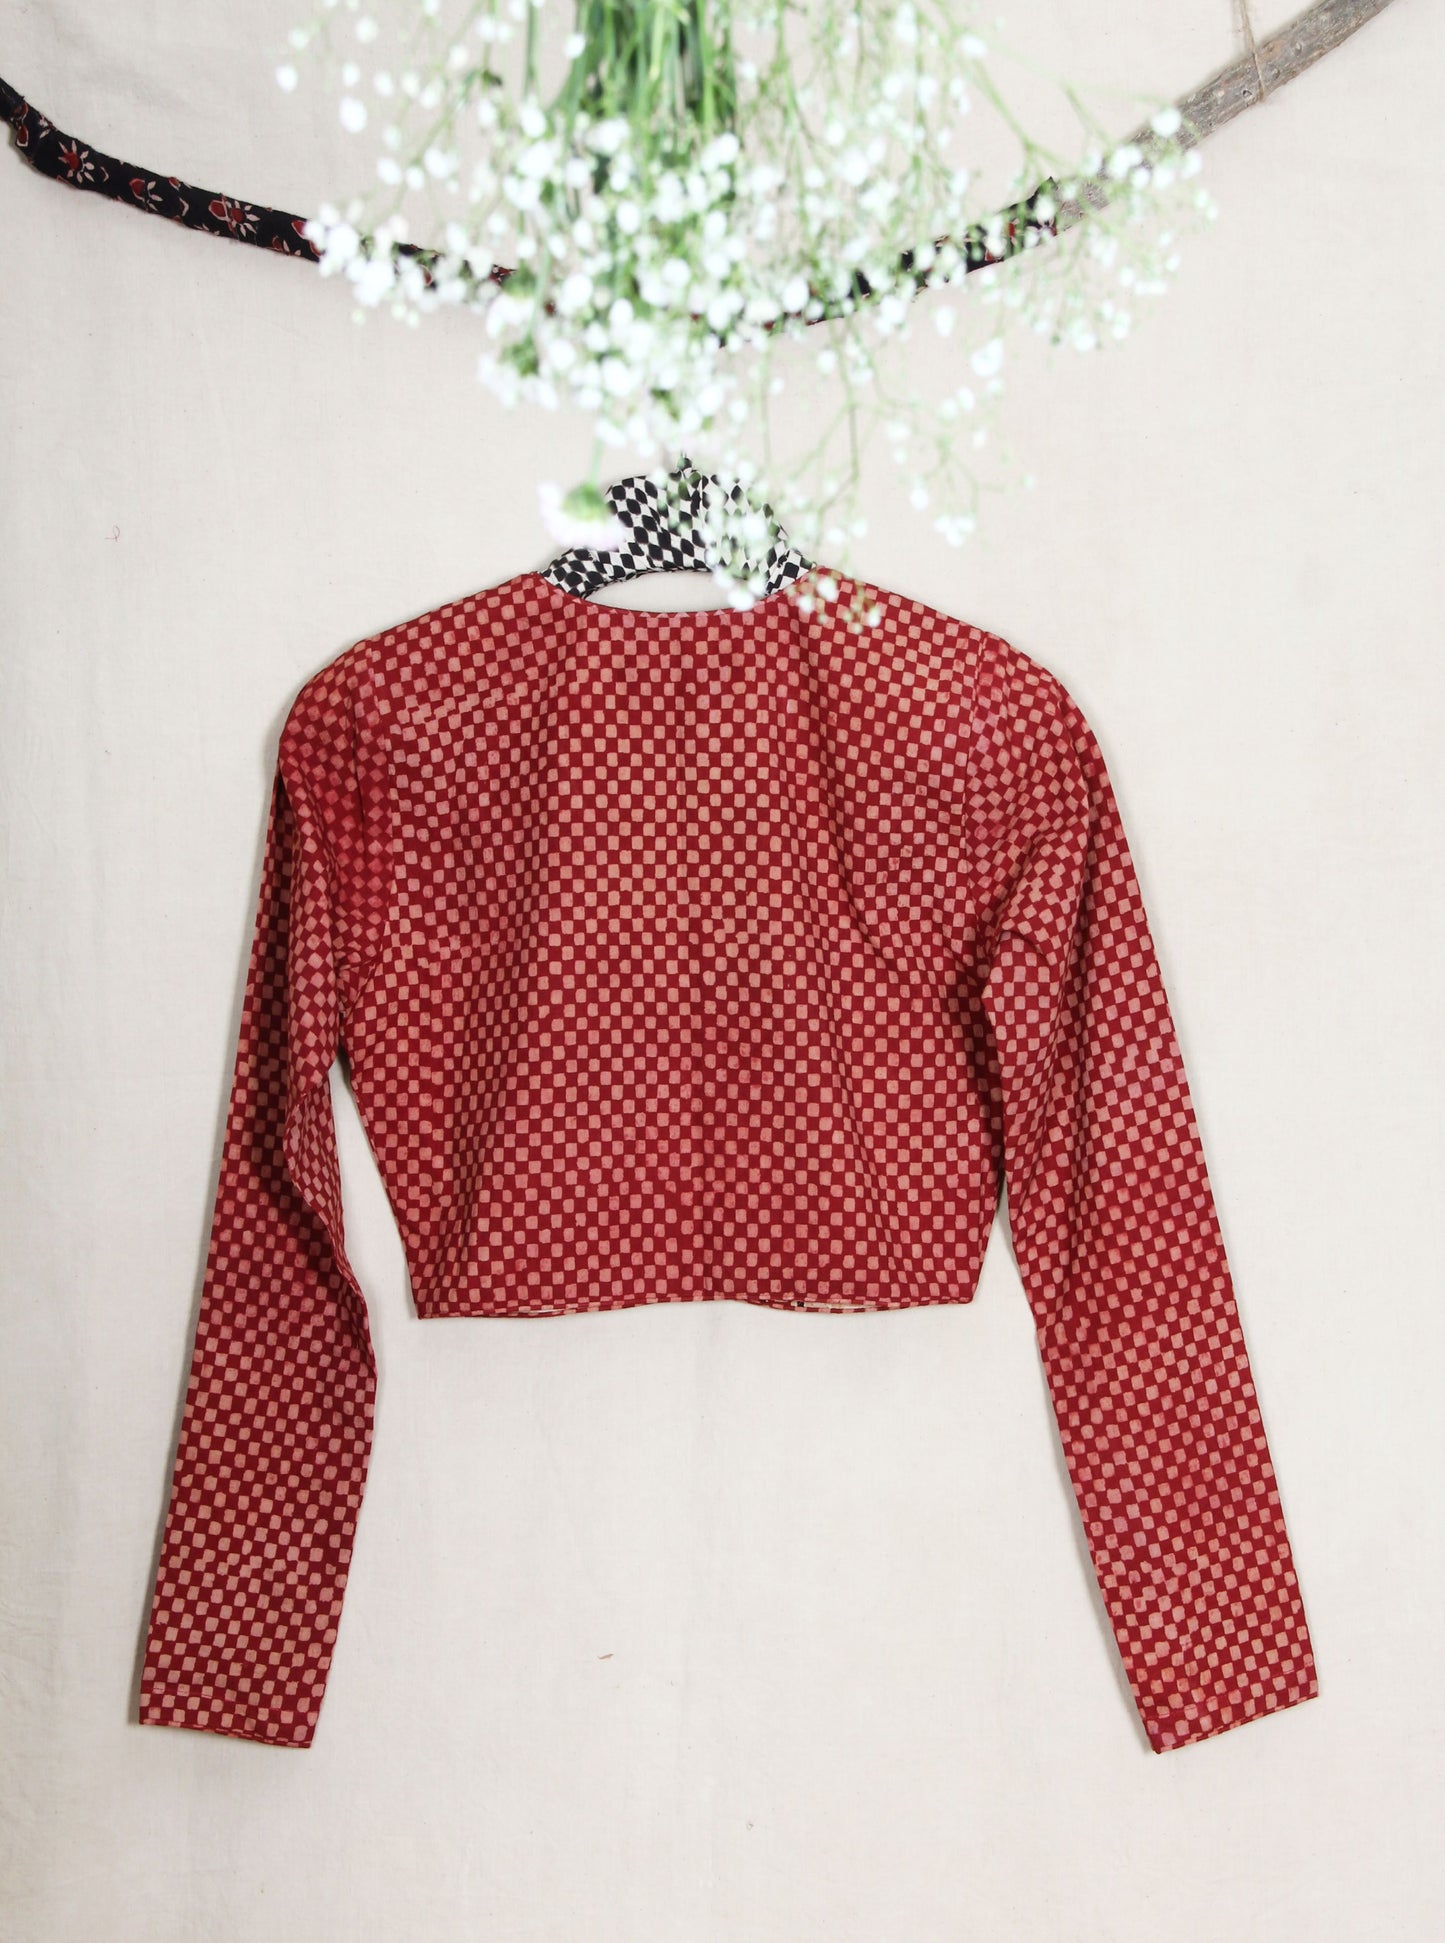 Madder dyed checkered ajrakh blouse, Full sleeves ajrakh blouse, Ajrakh hand block print checks blouse in madder red color, Sustainable fashion